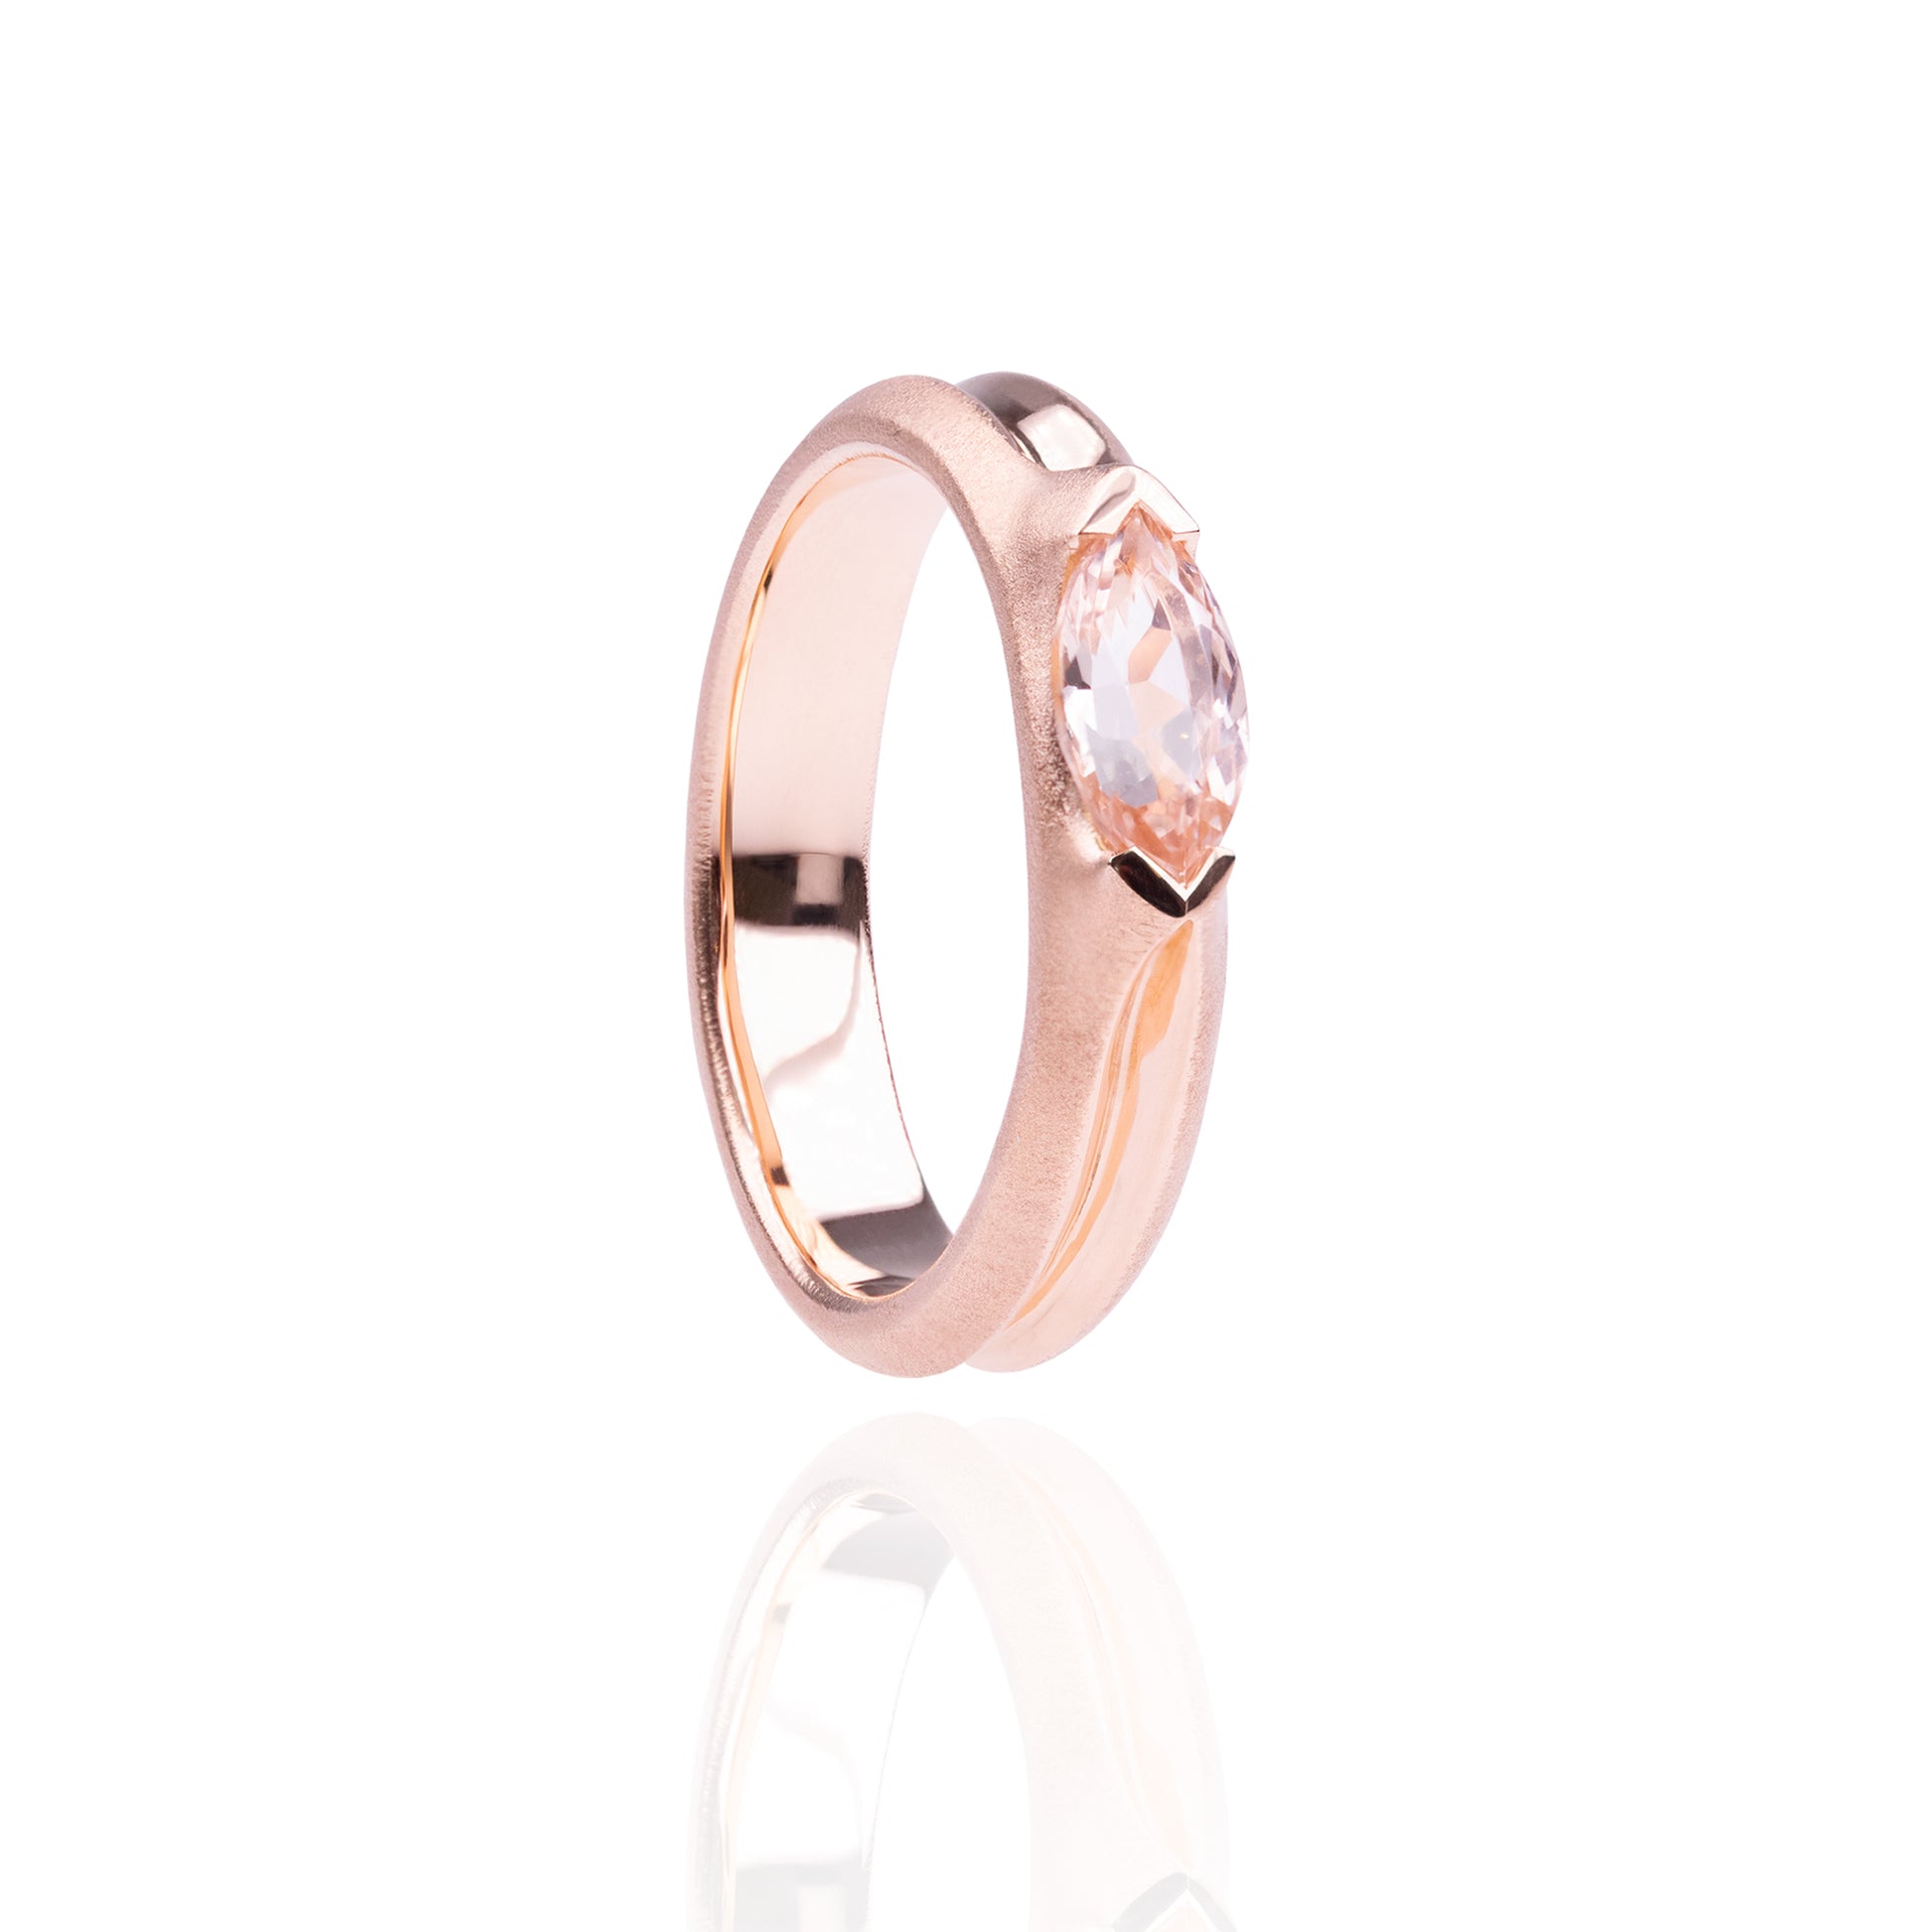 Orme-Brown Contemporary Fine Jewellery Engagement Ring Recycled Rose Gold Marquise Peach Sapphire Ethical Sustainable